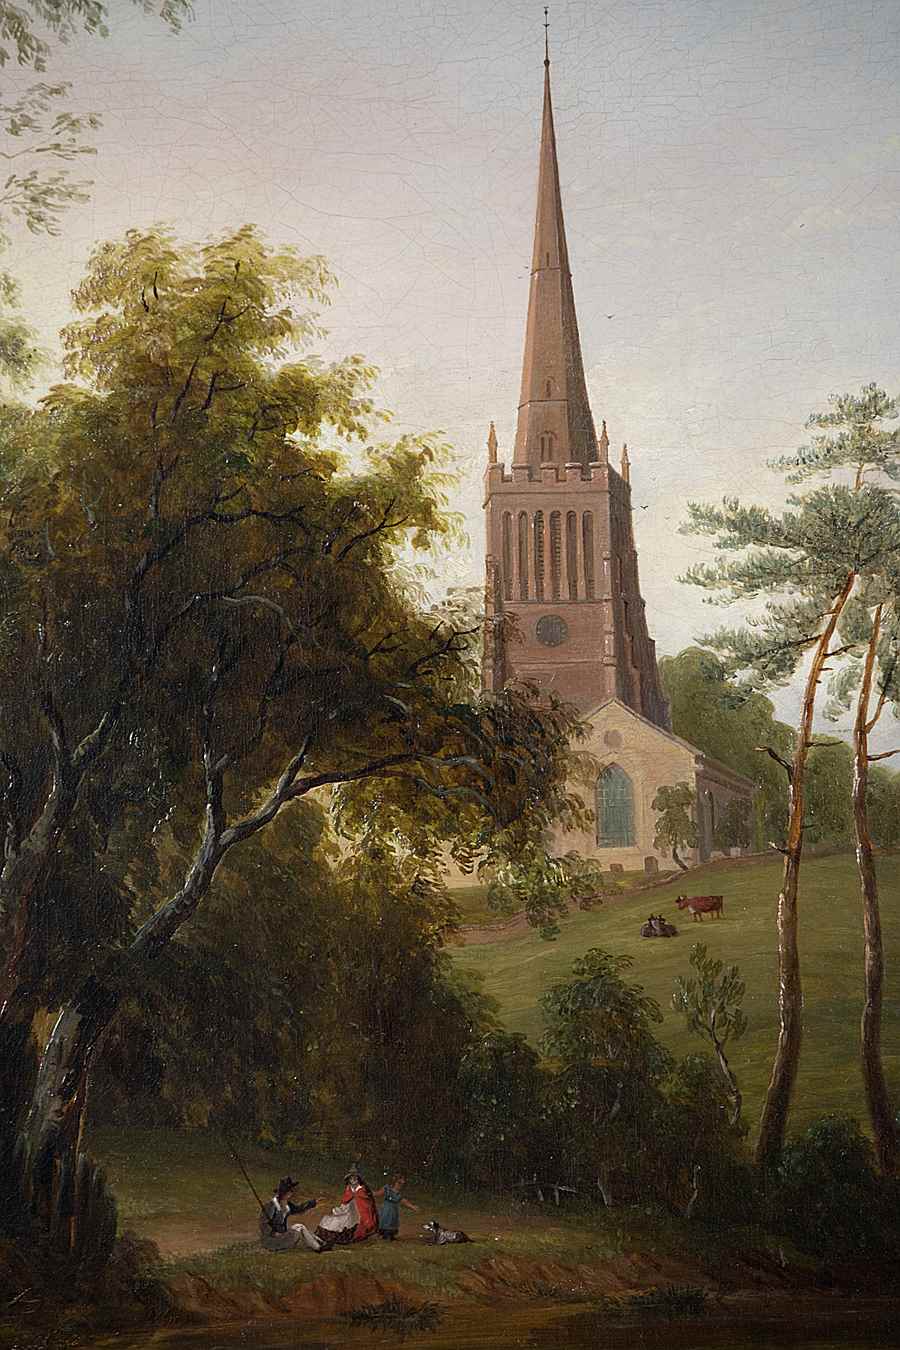 Figures by a Pond, with Cattle and a Church beyond - Sarah Ferneley (1812 - 1903)